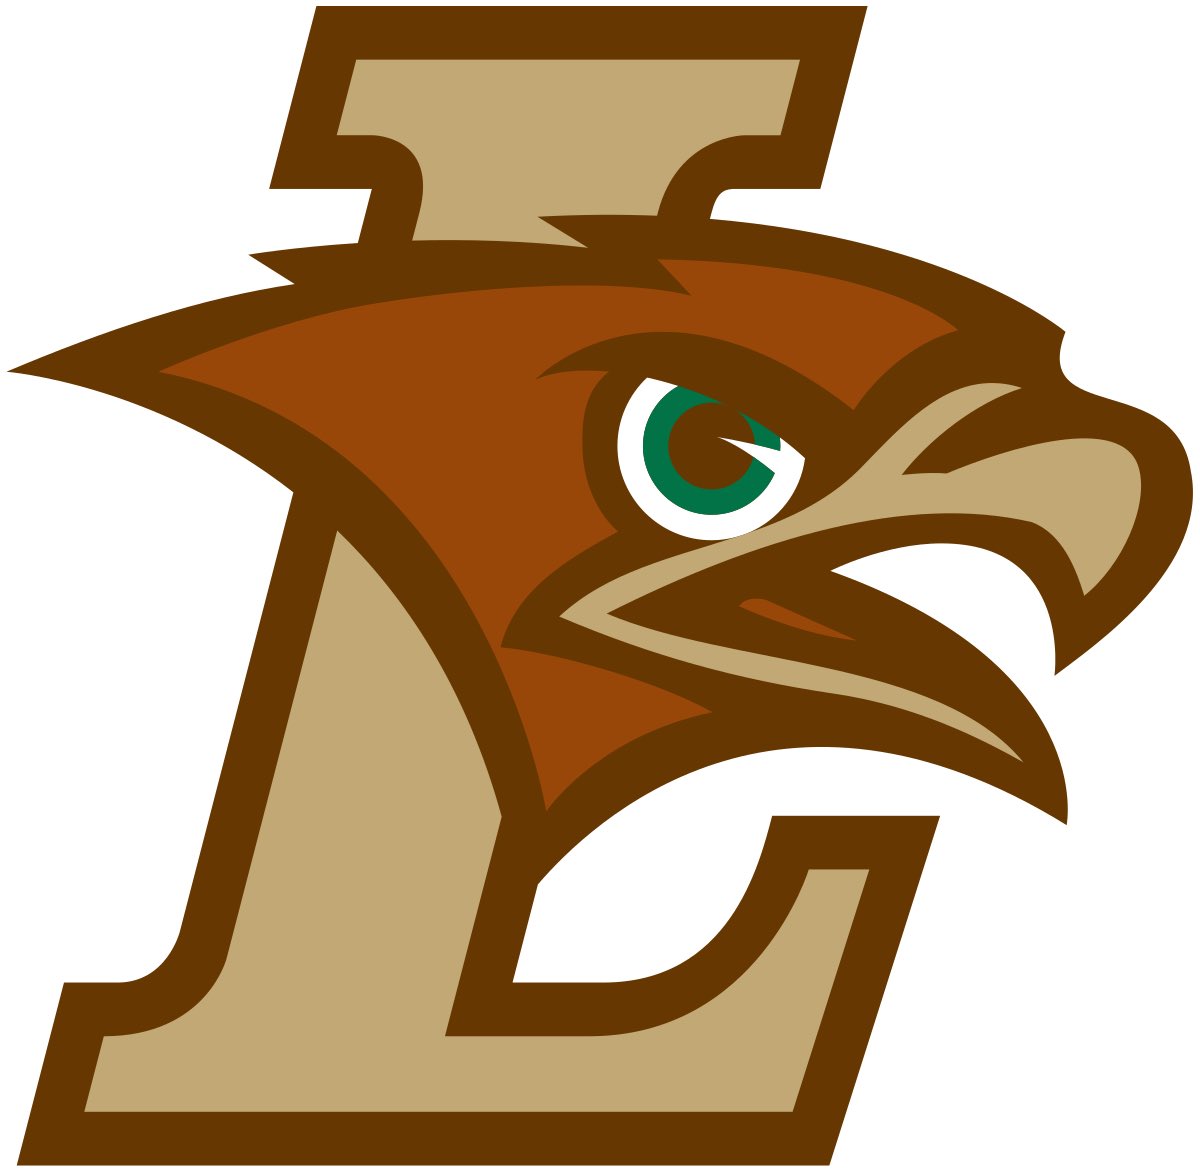 Blessed to have received my 17th Division 1 offer from Lehigh University!! I appreciate the opportunity @CoachDanHunt @Coach_Mukes @QBcoach_B @BradMaendler @WayneWarriorFB1